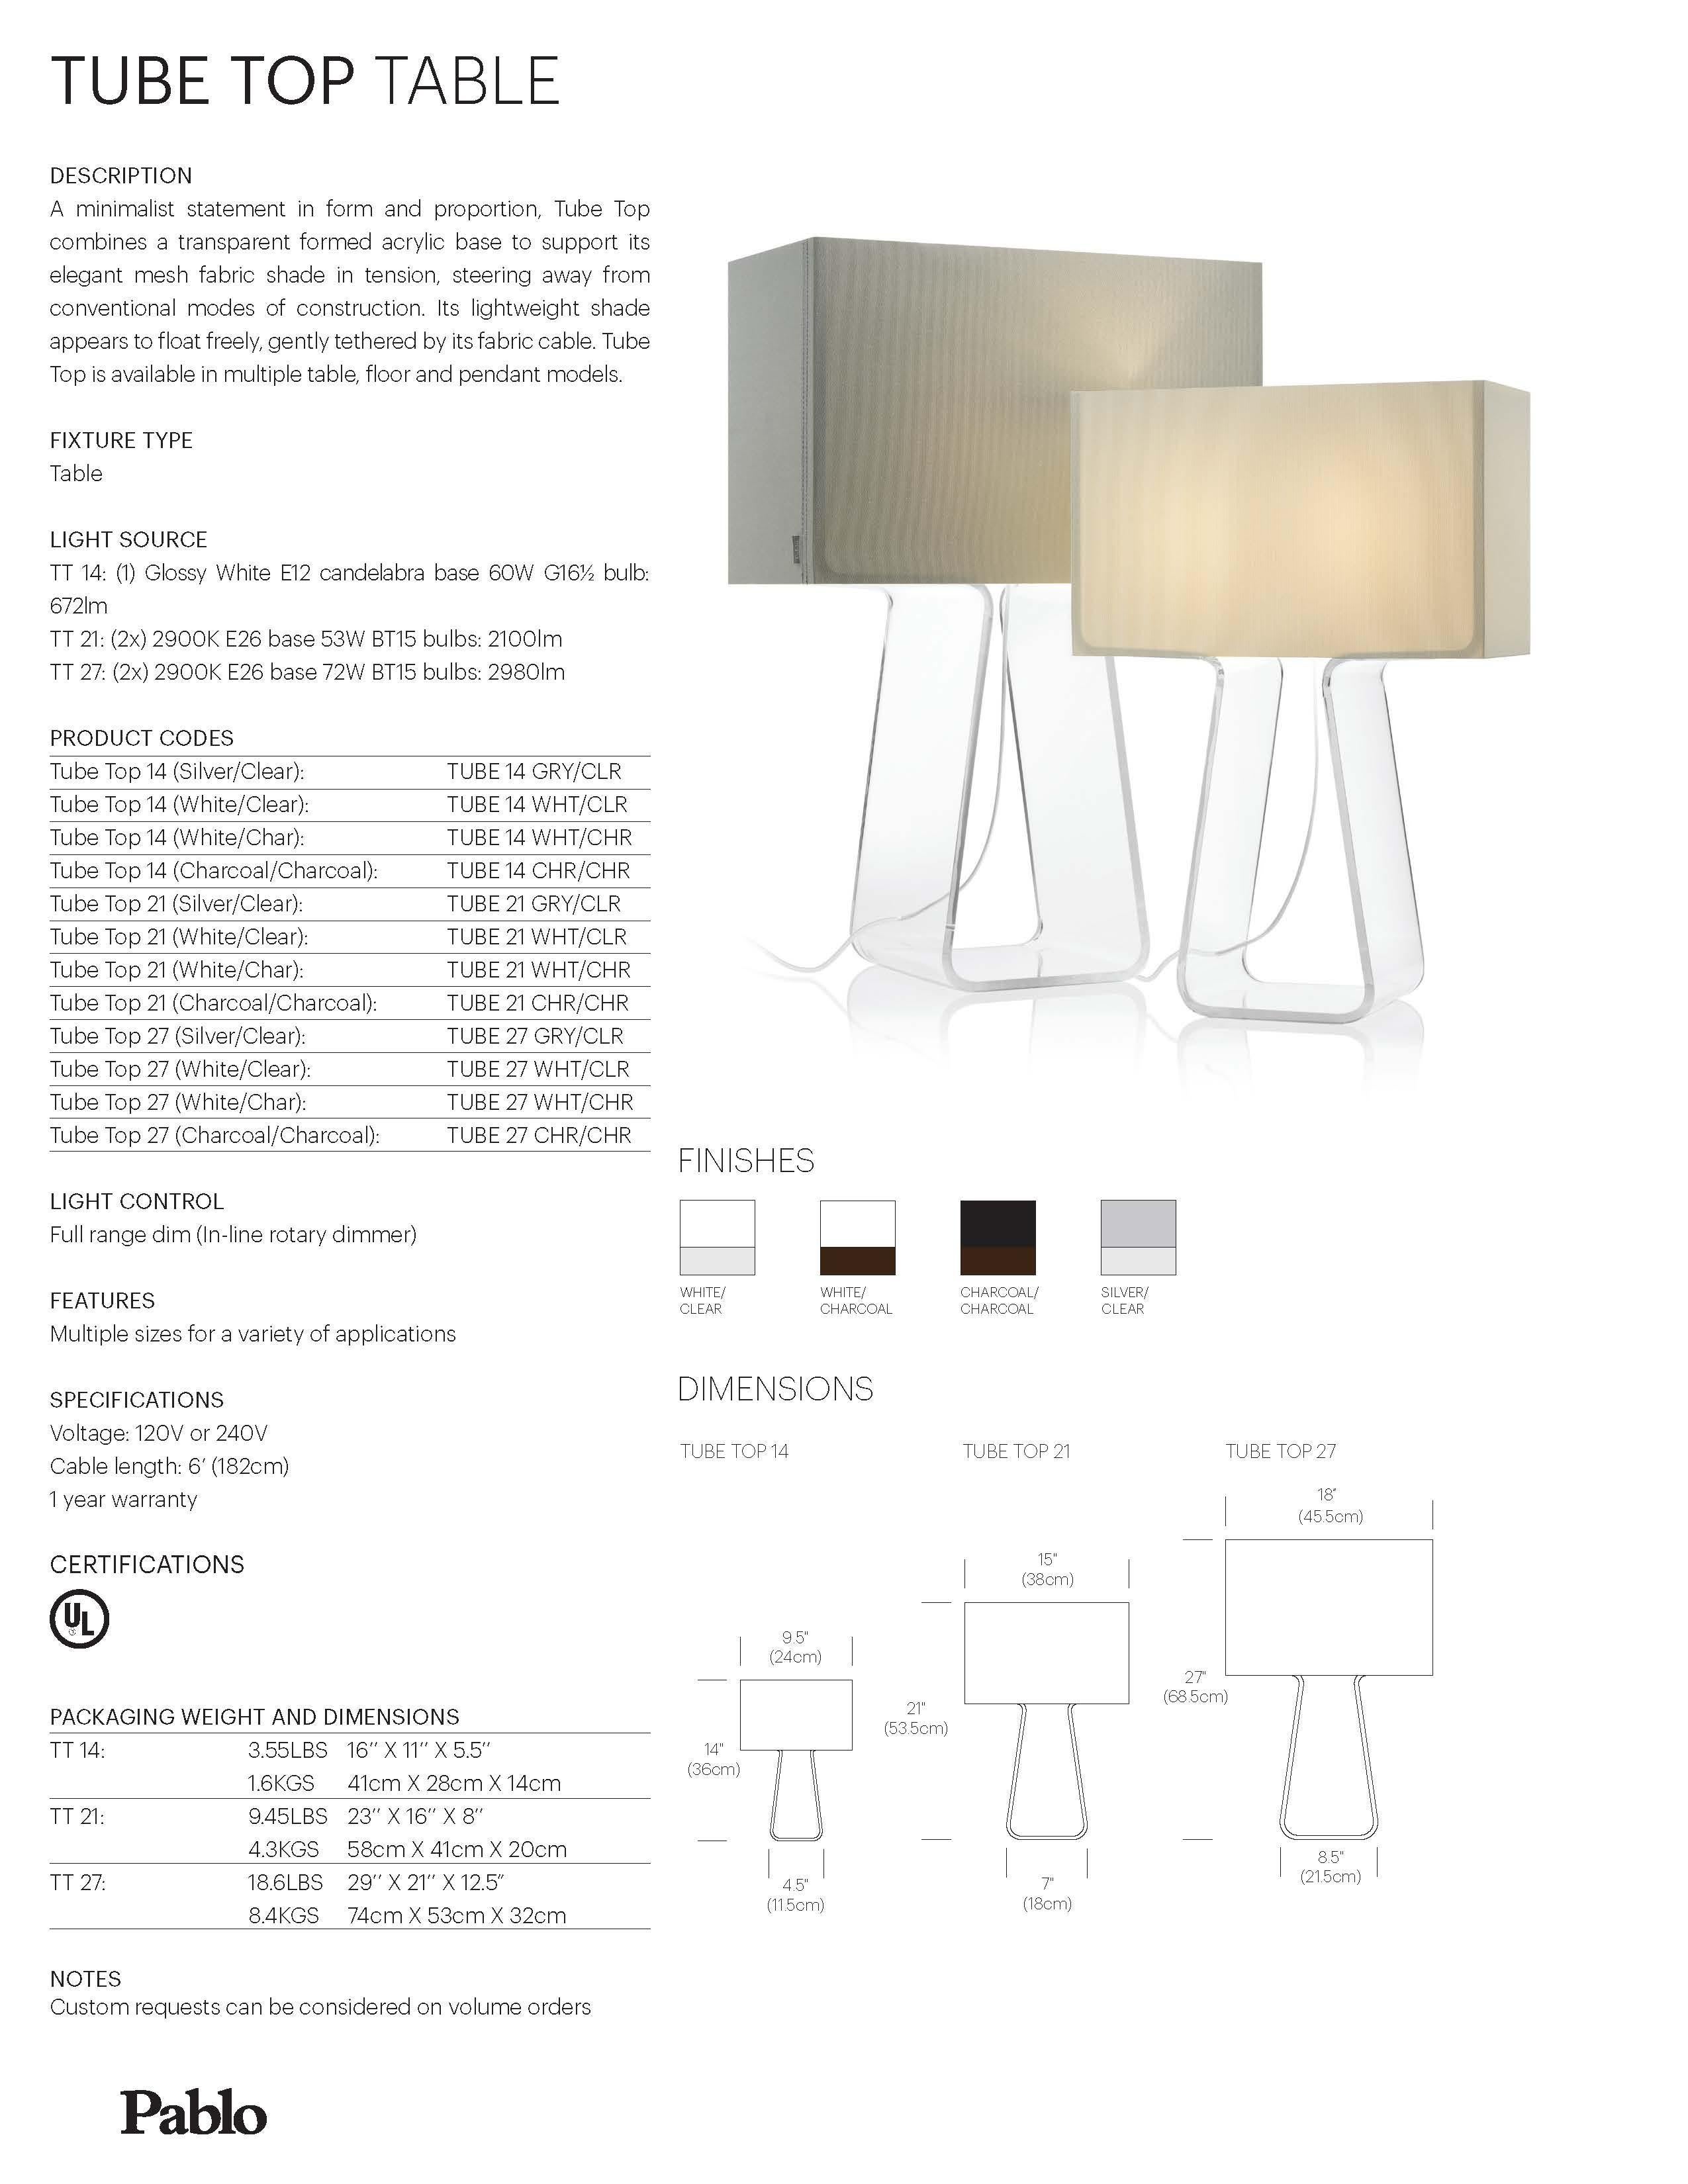 American Tubetop 27 Table Lamp in White and Clear by Pablo Designs For Sale